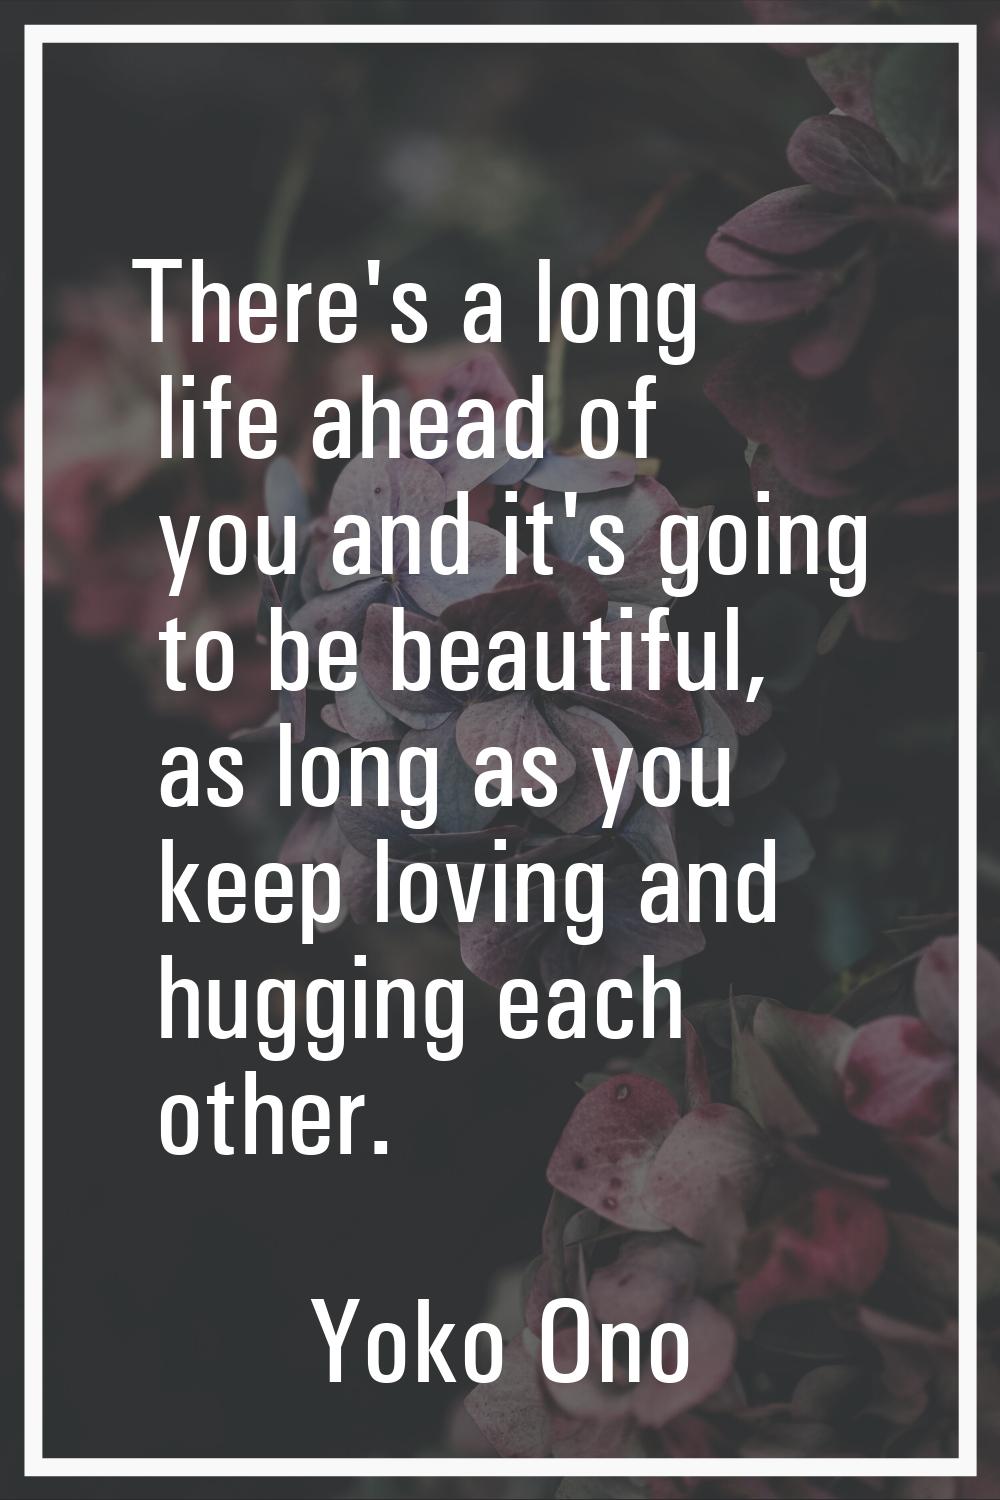 There's a long life ahead of you and it's going to be beautiful, as long as you keep loving and hug